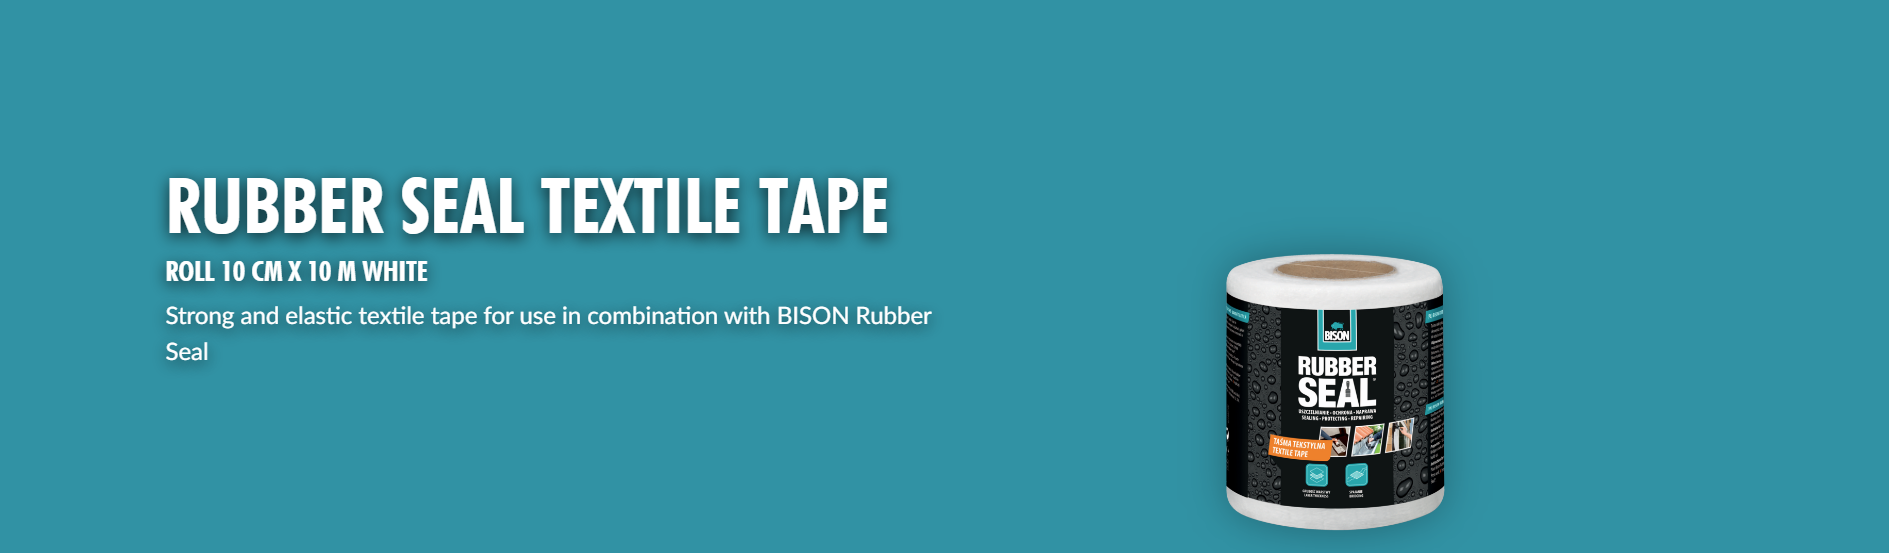 Rubber Seal Textile Tape - Banner.